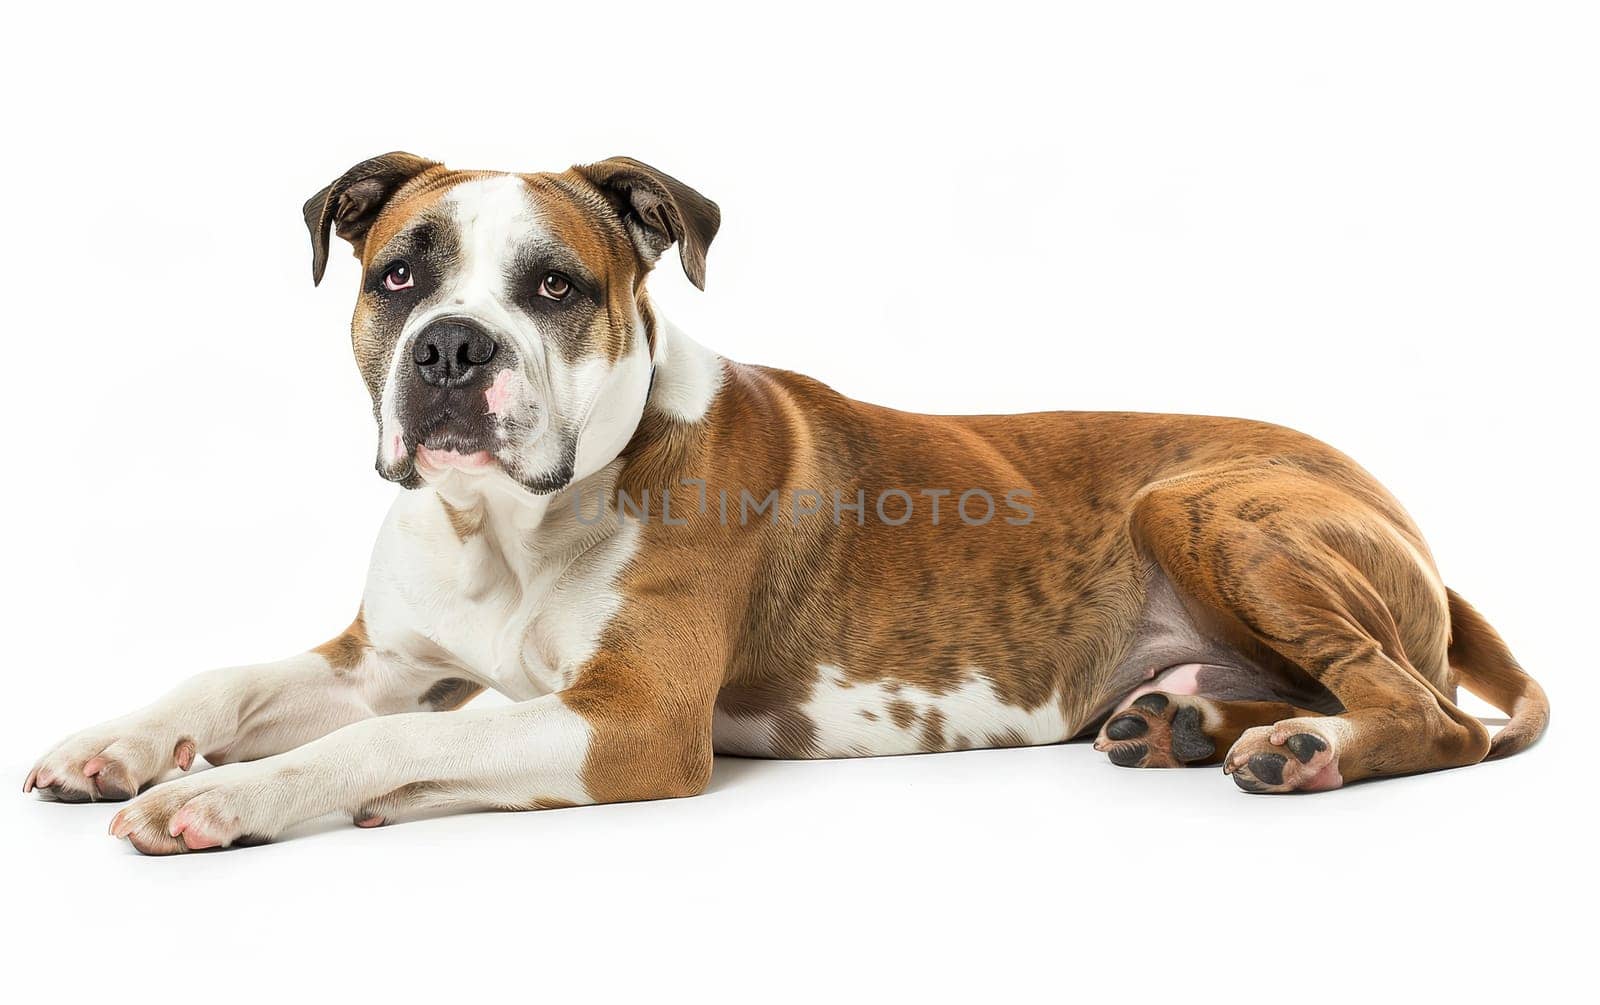 A muscular American Bulldog lies down, its gaze fixed forward with an expression of calm attentiveness. The dog's white and tan coat stands out vividly against the white background. by sfinks